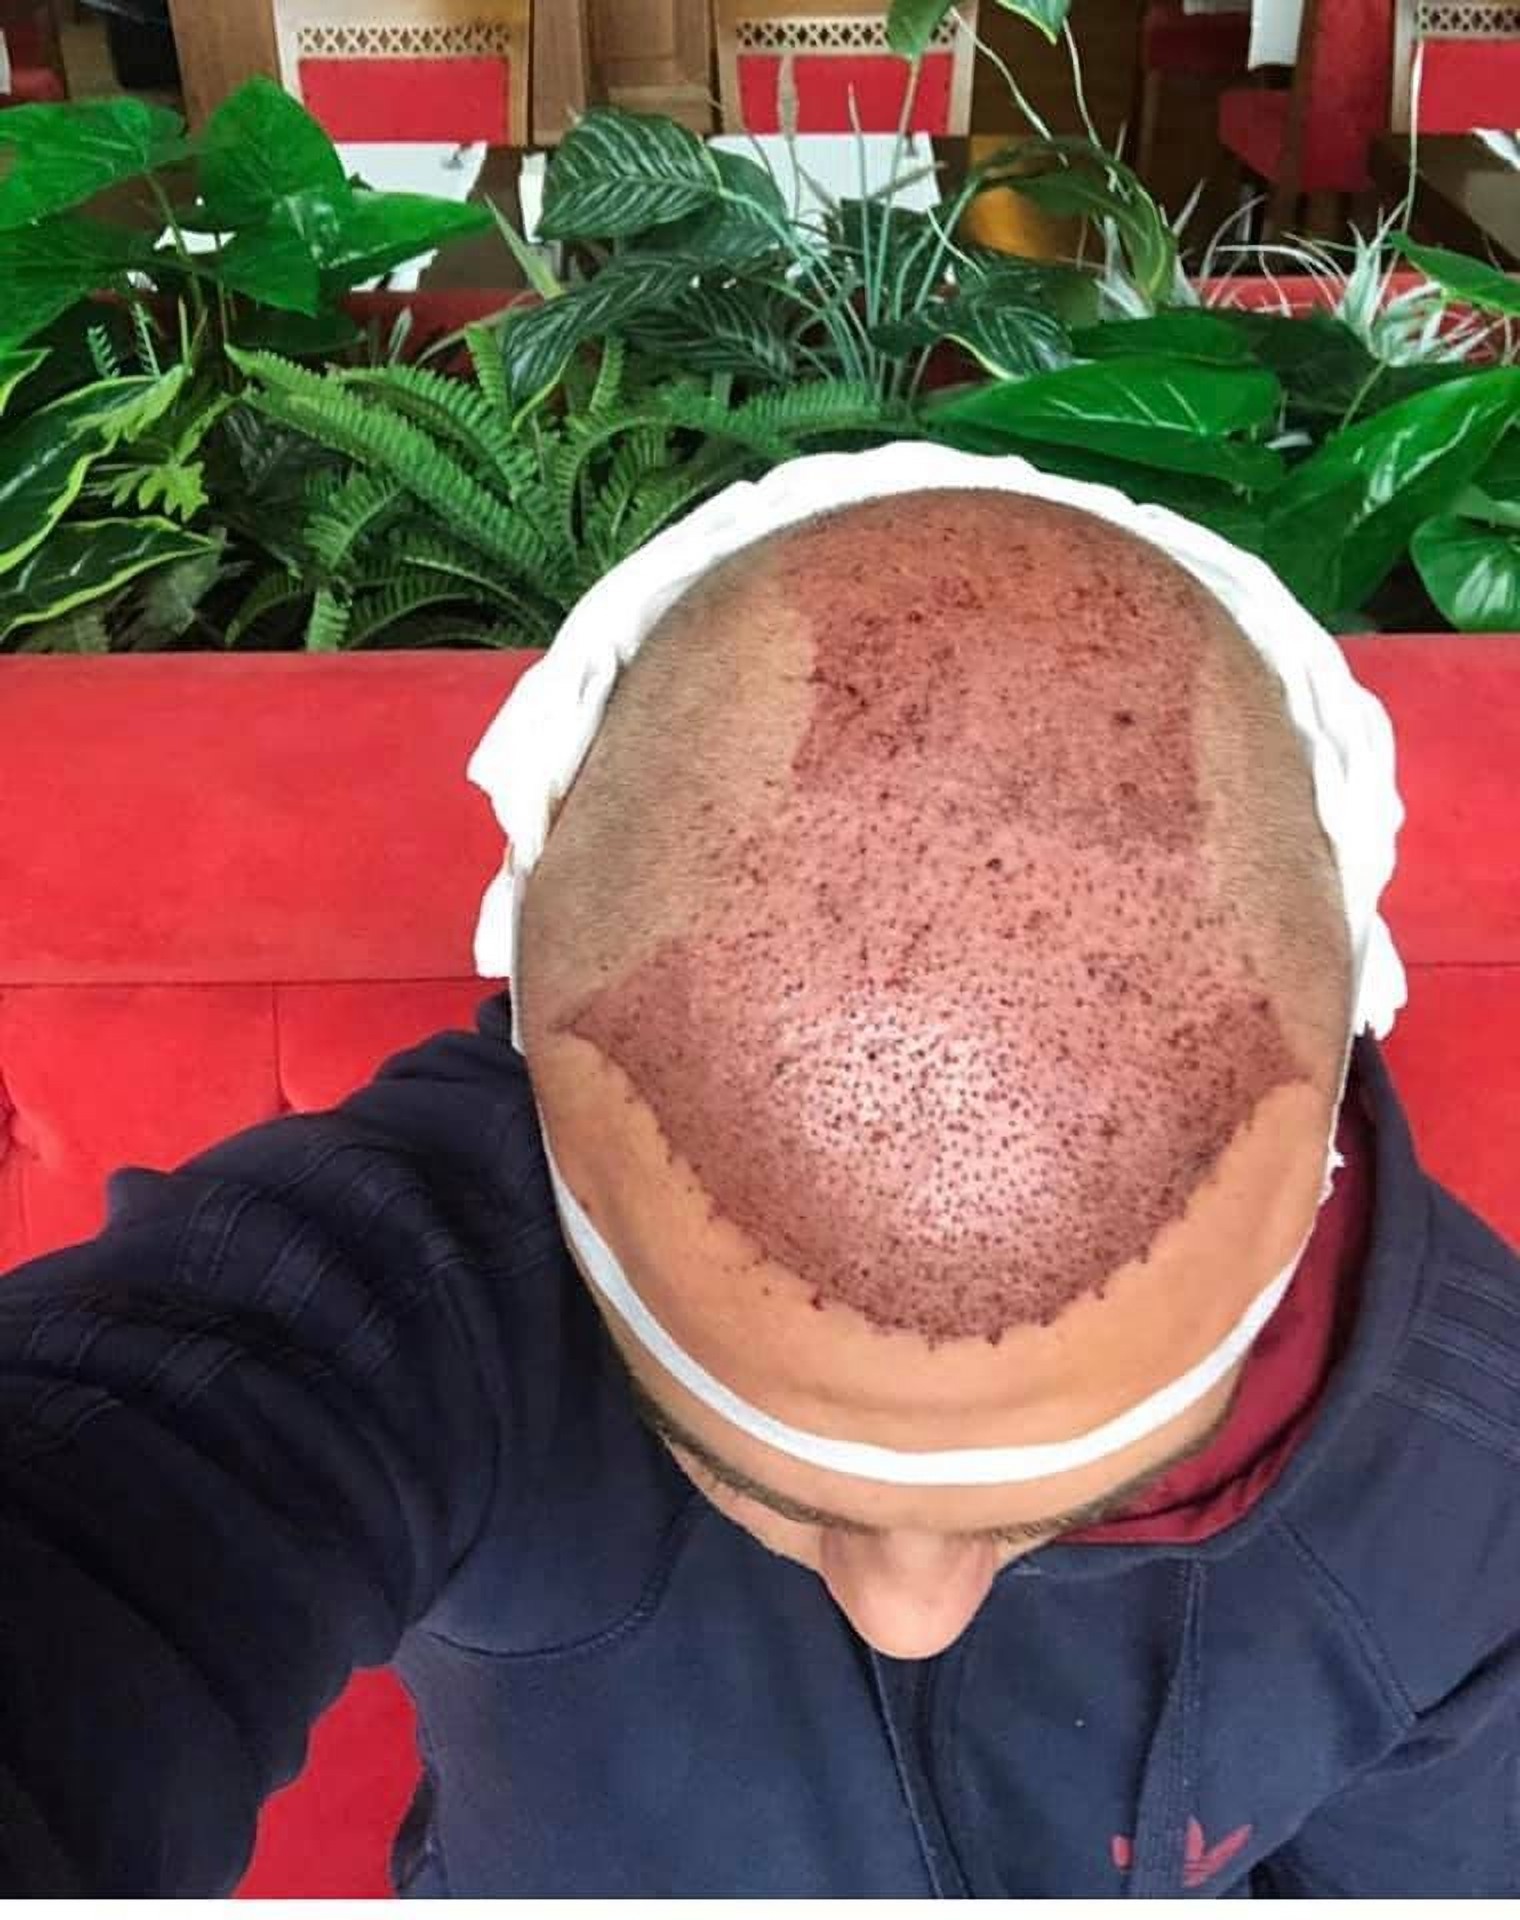 FUE Hair Transplant in Istanbul at Estethica Clinic